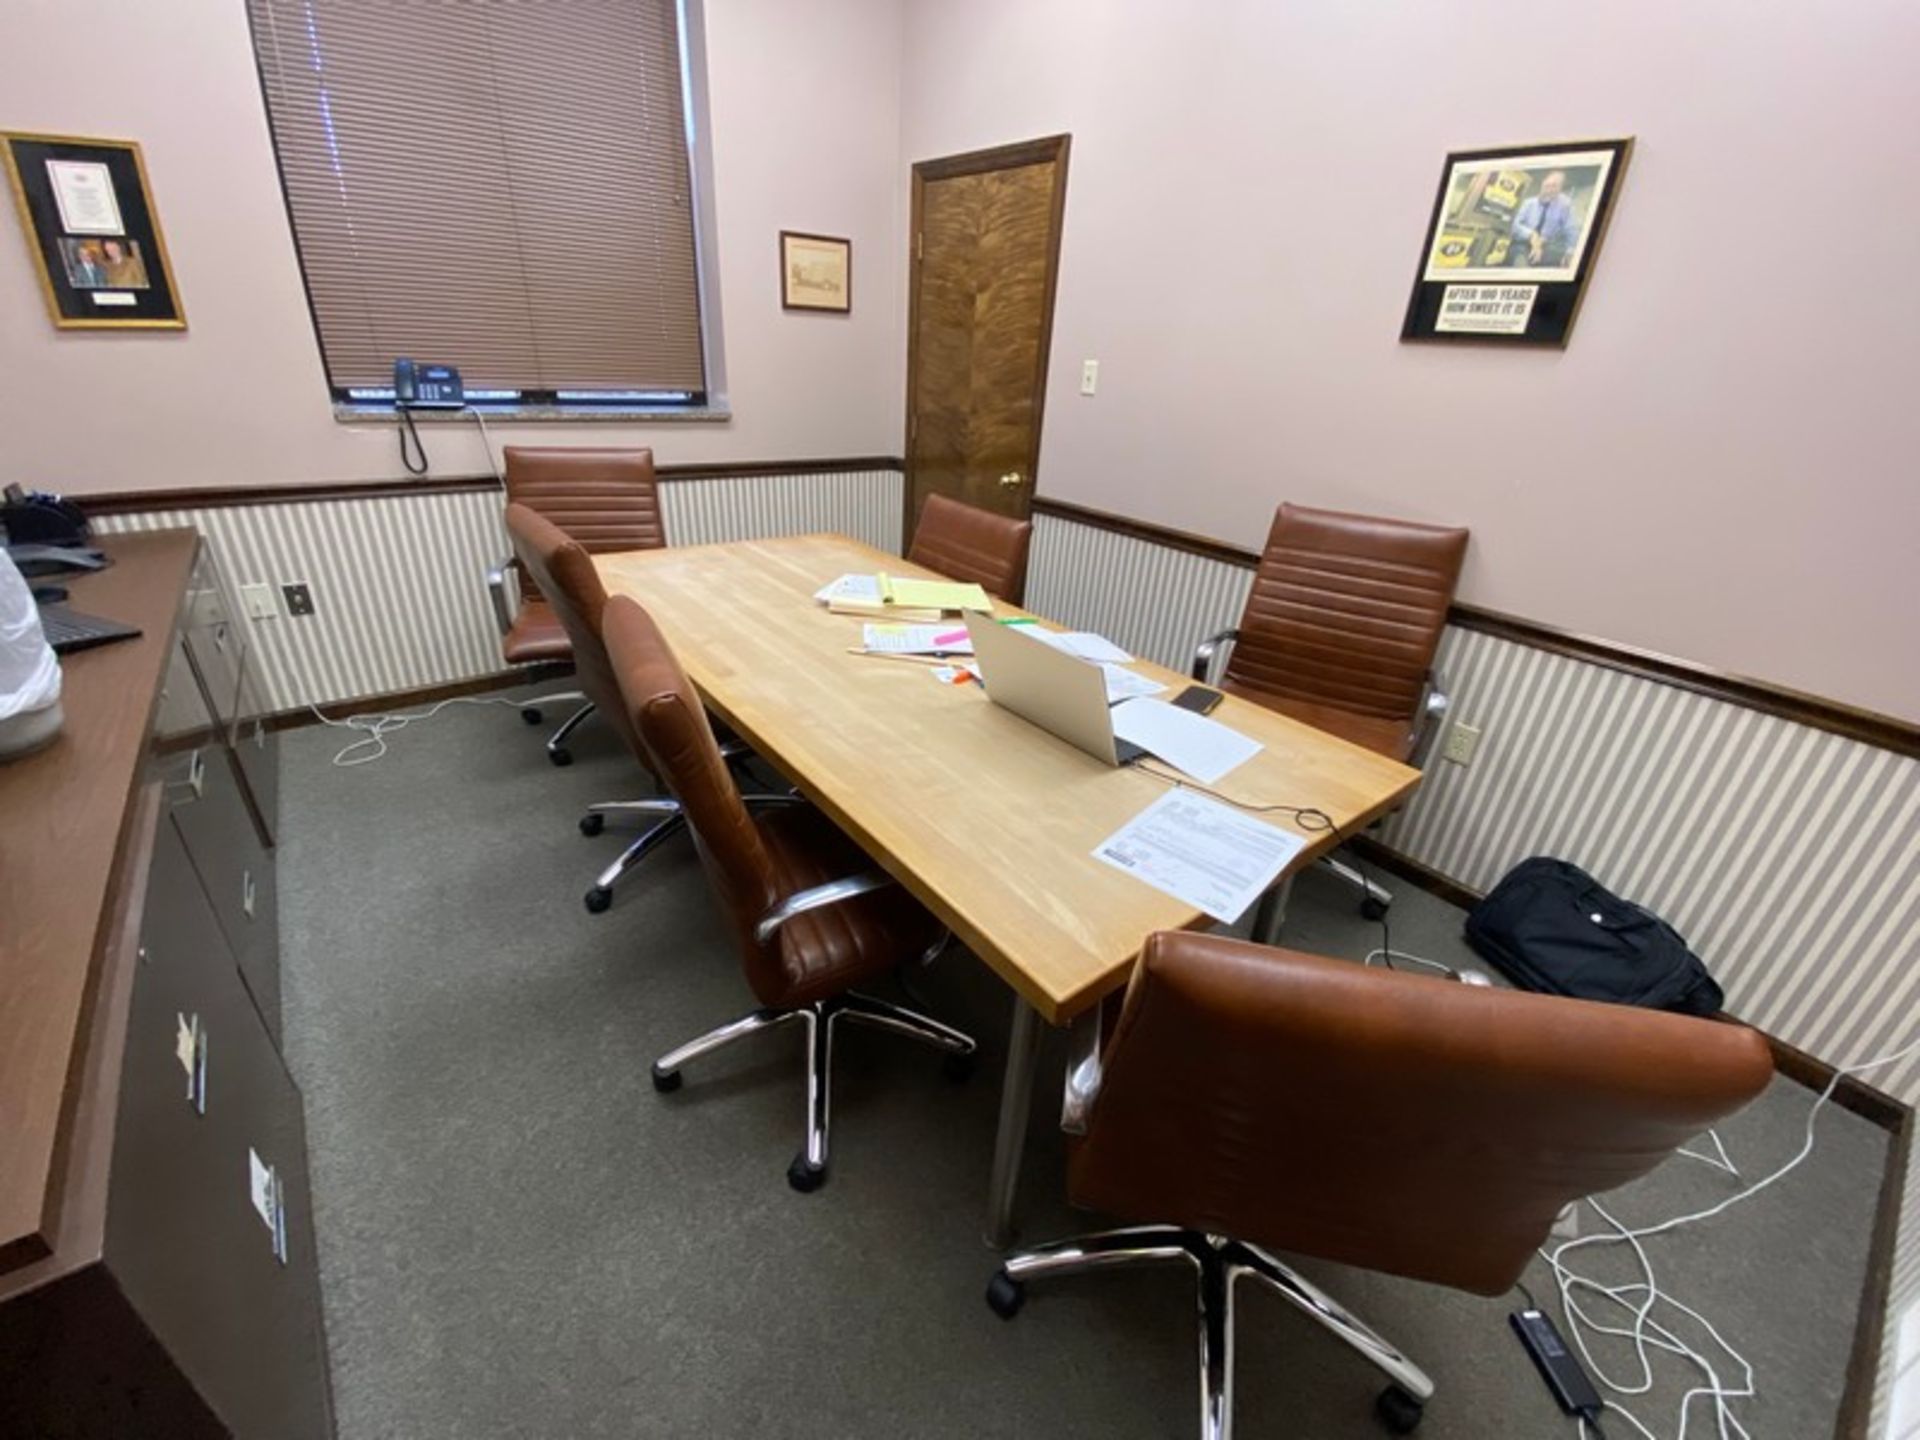 CONTENTS OF CONFERENCE ROOM, INCLUDES TABLE, CHAIRS, WALL MOUNTED TV, & SIDE UNIT (LOCATED IN CALLER